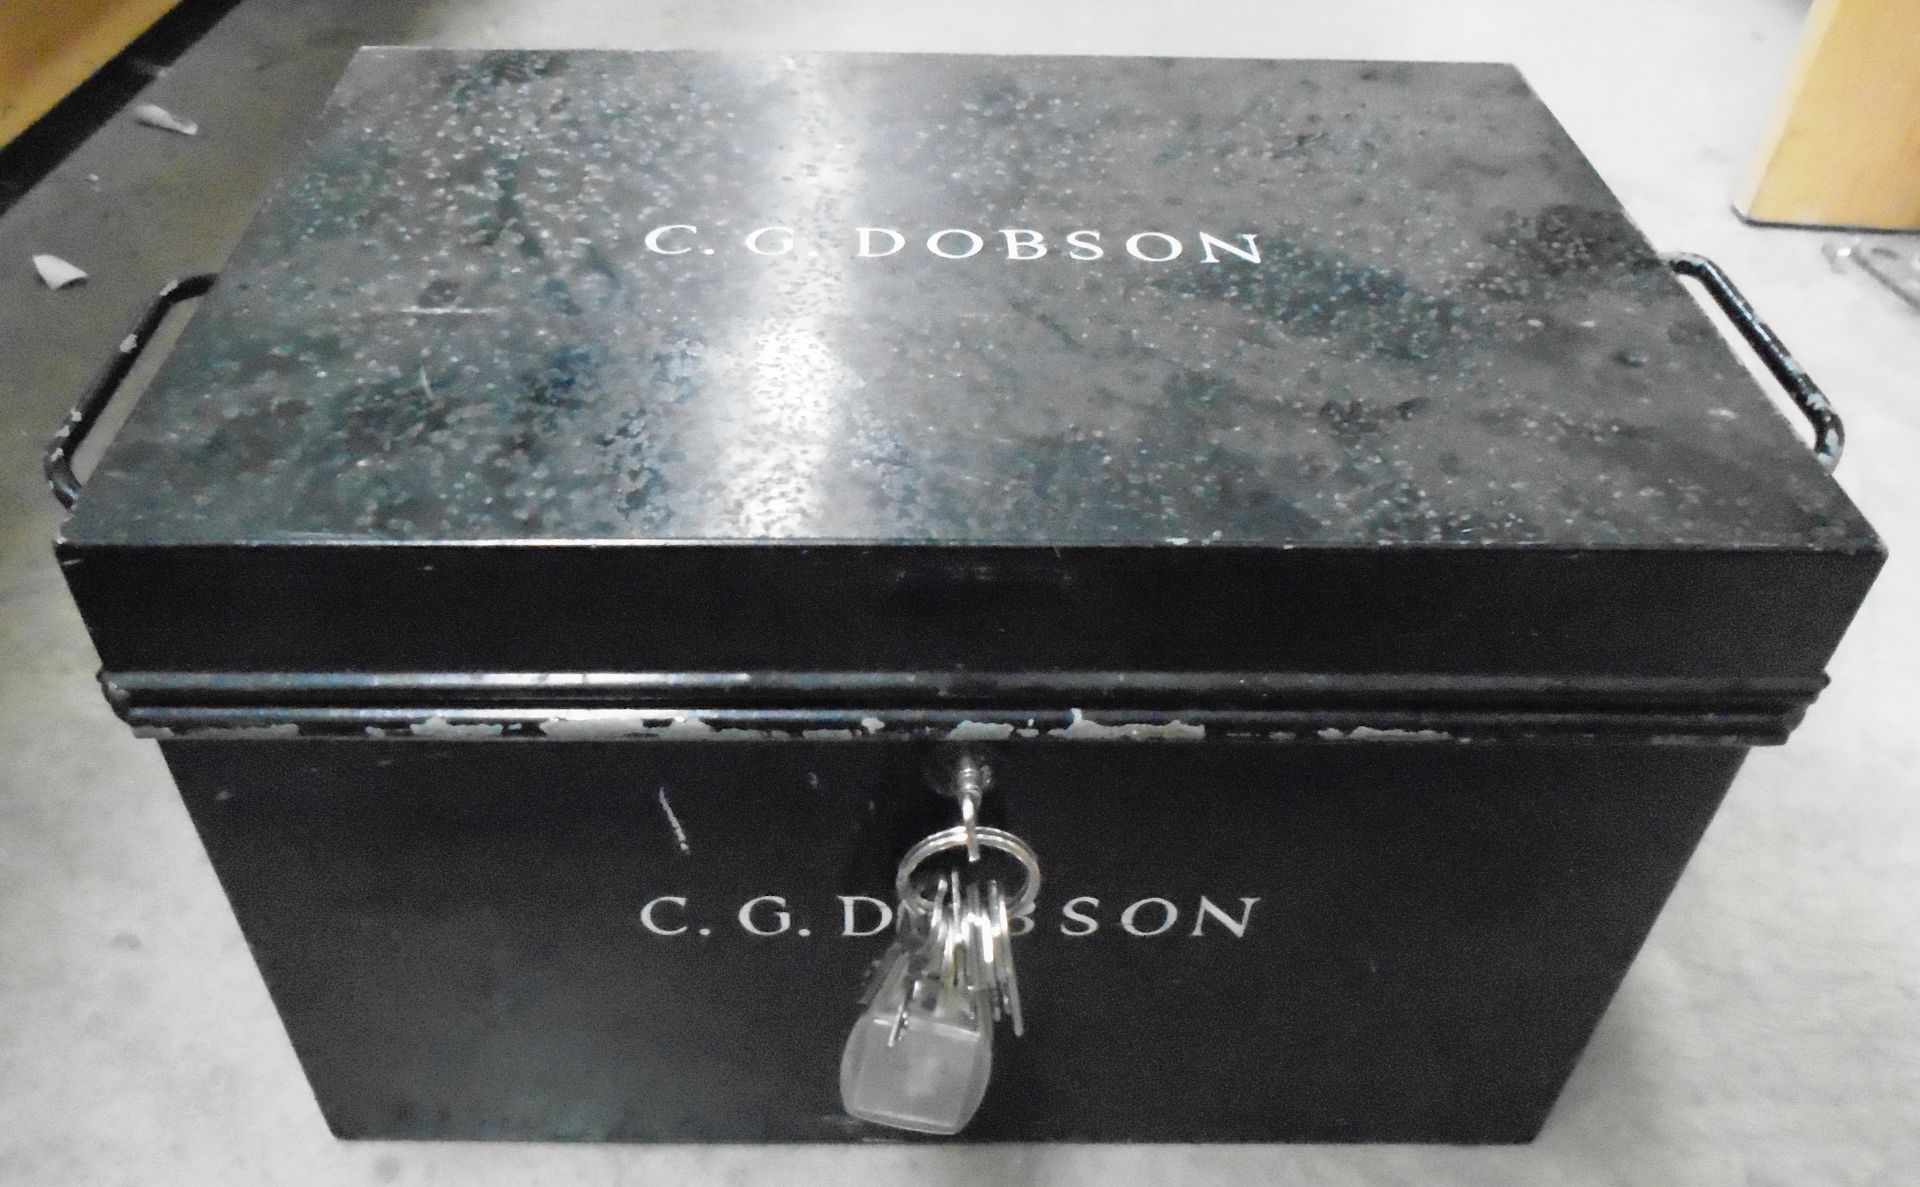 A black metal deed box with 2 handles and keys